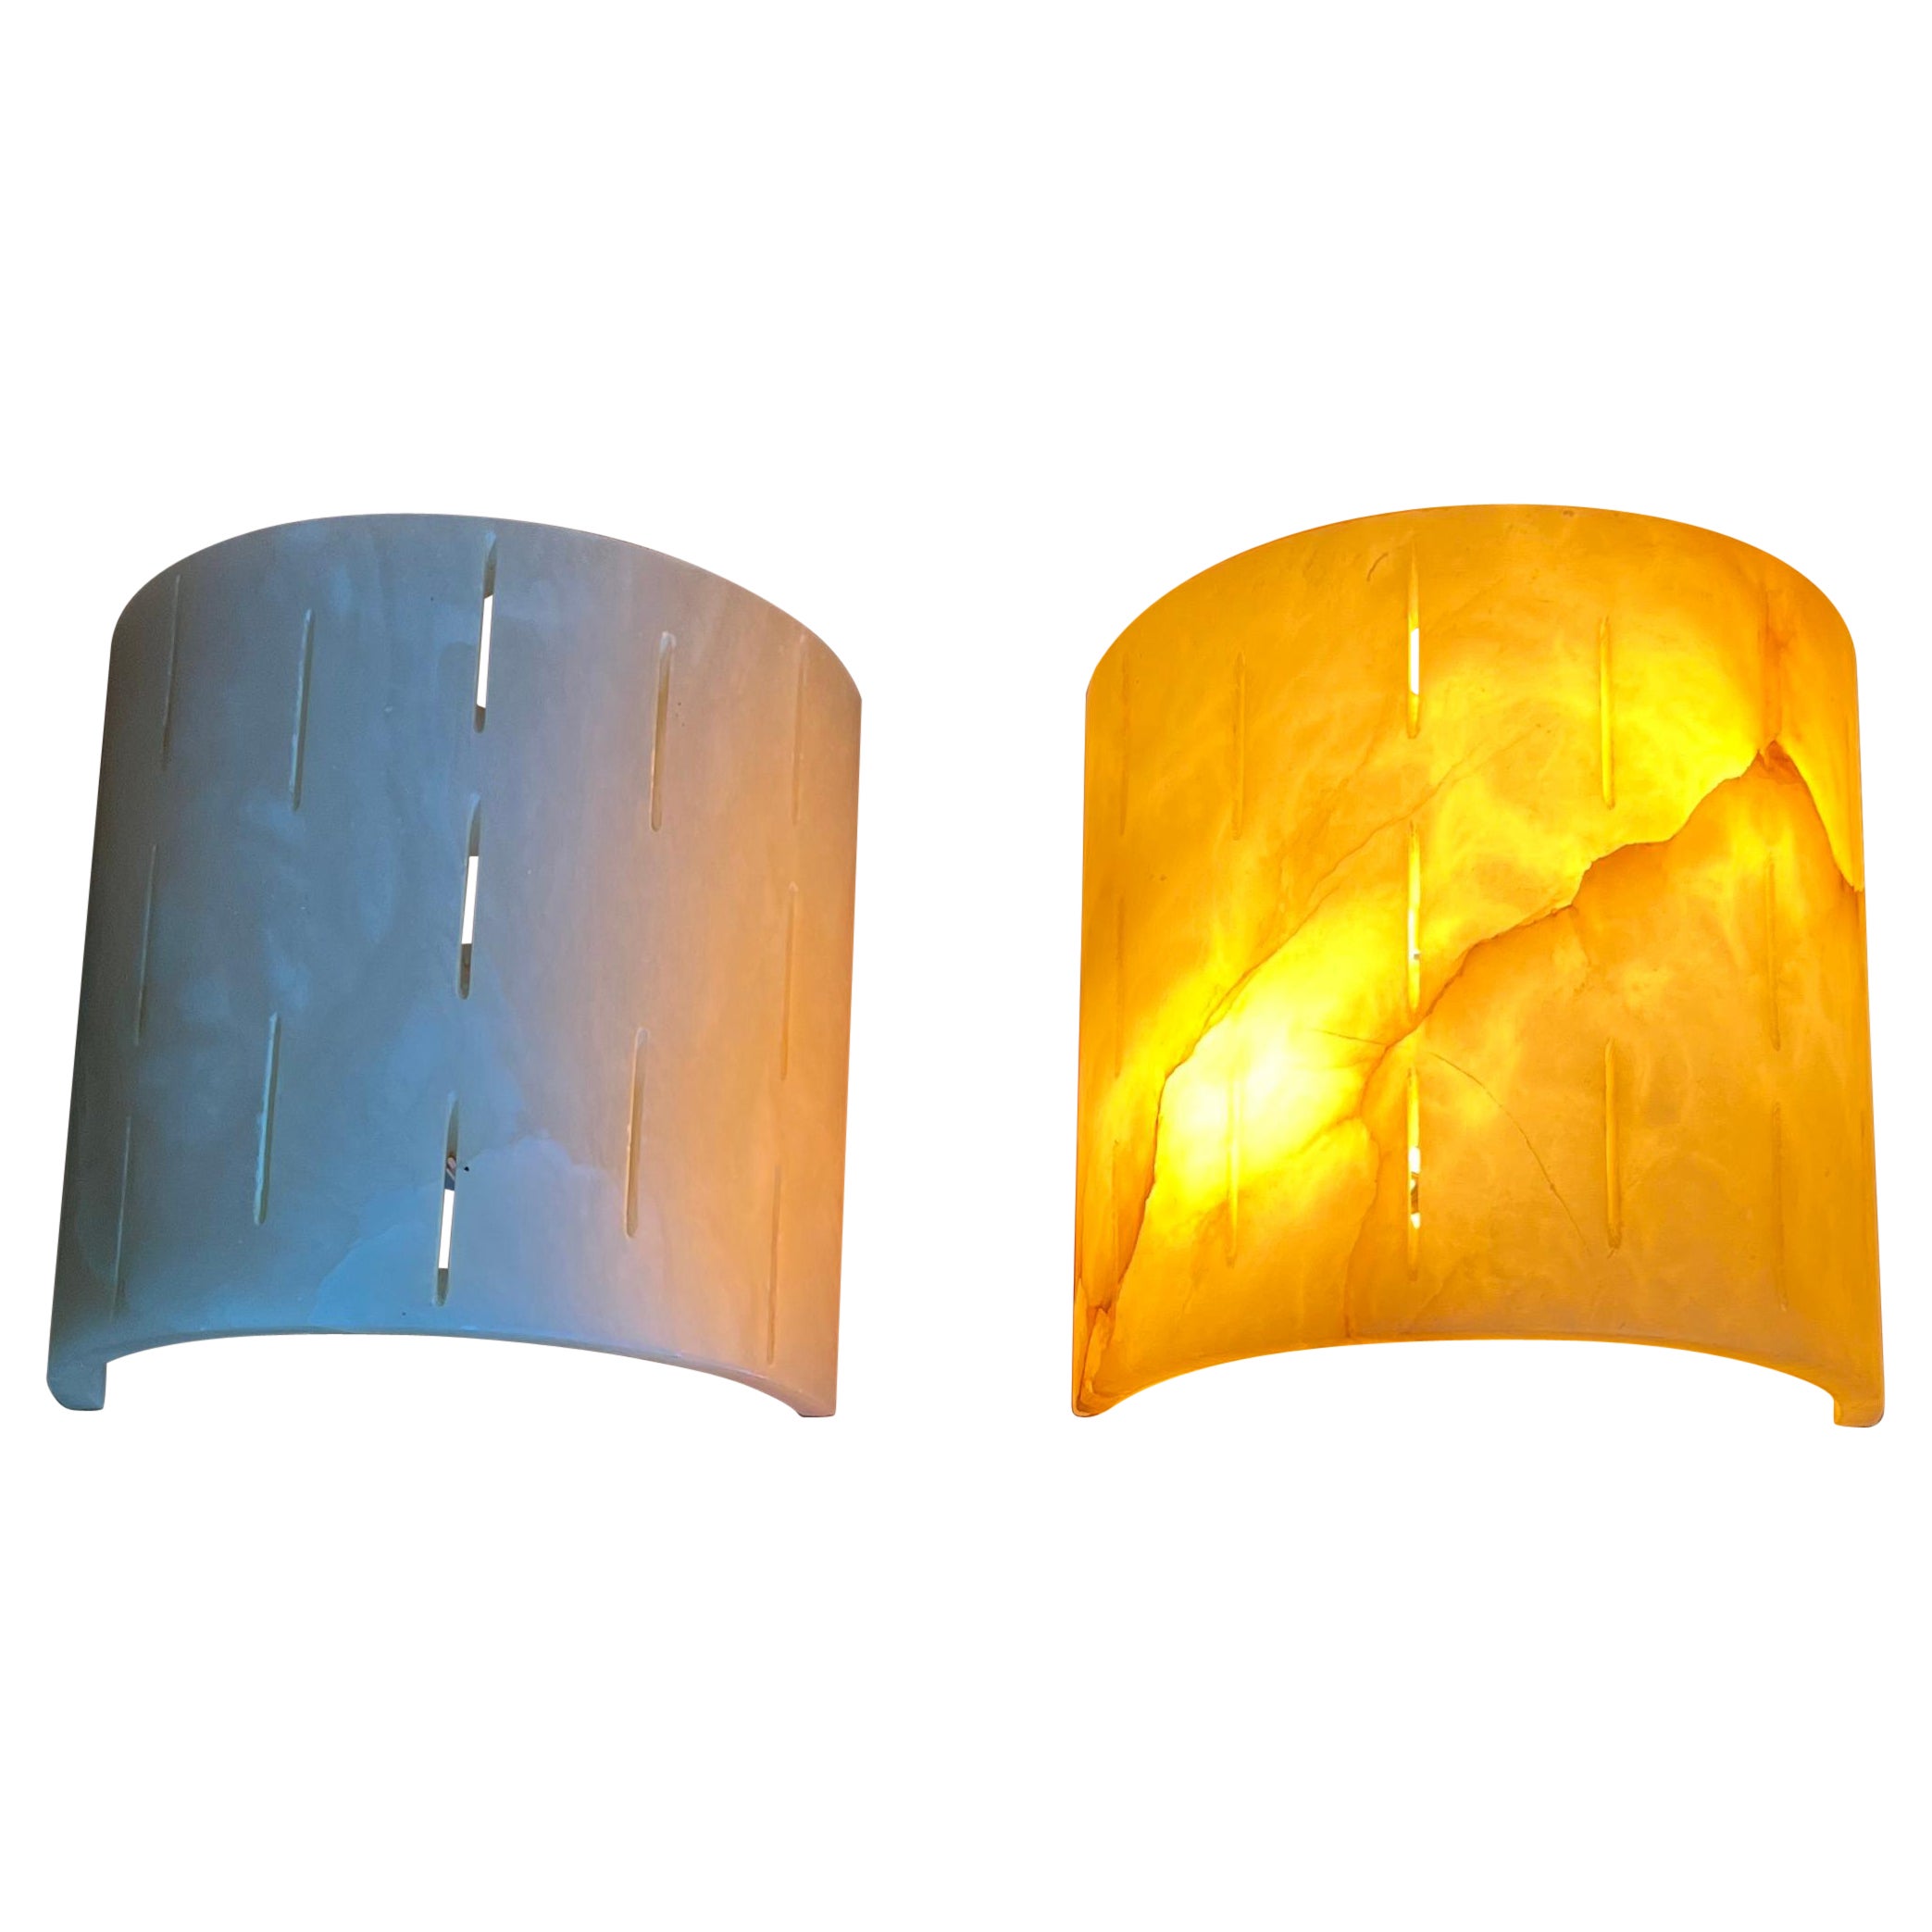 Handcrafted and very stylish pair of midcentury made alabaster 2-light (up & down) wall lights.

If you are looking for a great shape and practical size pair of sconces to grace your living space then these natural mineral stone fixtures could be